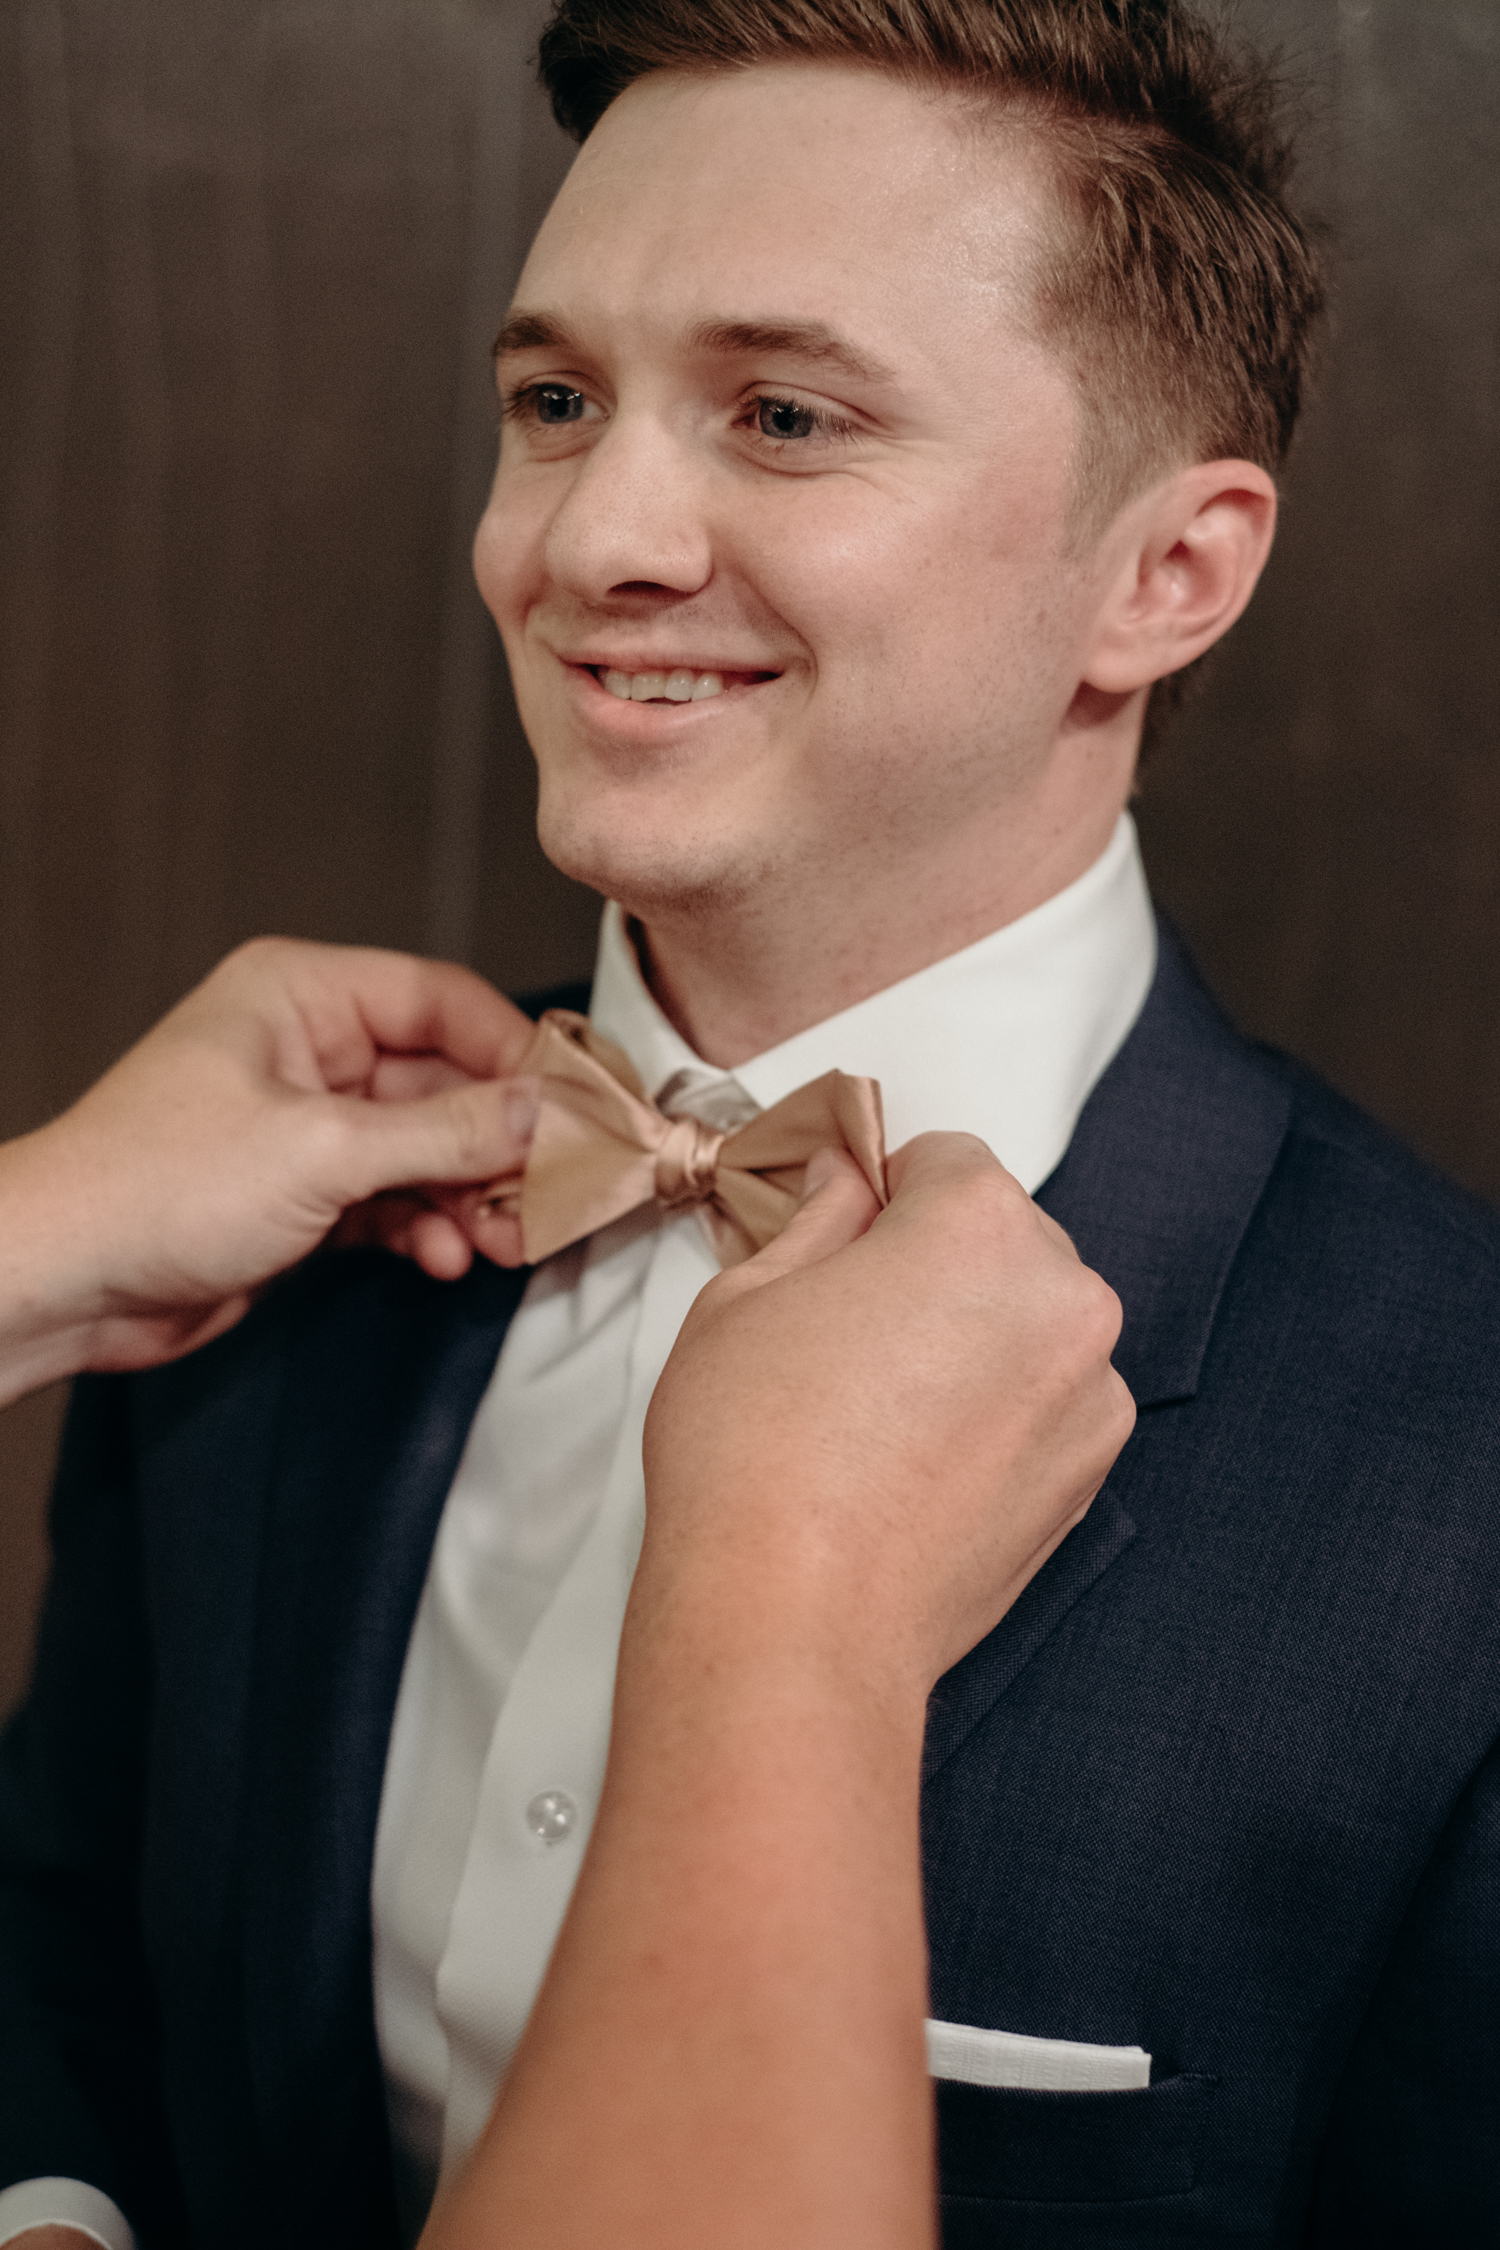 A groom gets his bowtie checked by a groomsman before he walks down the aisle at his wedding at Lansdowne Resort.